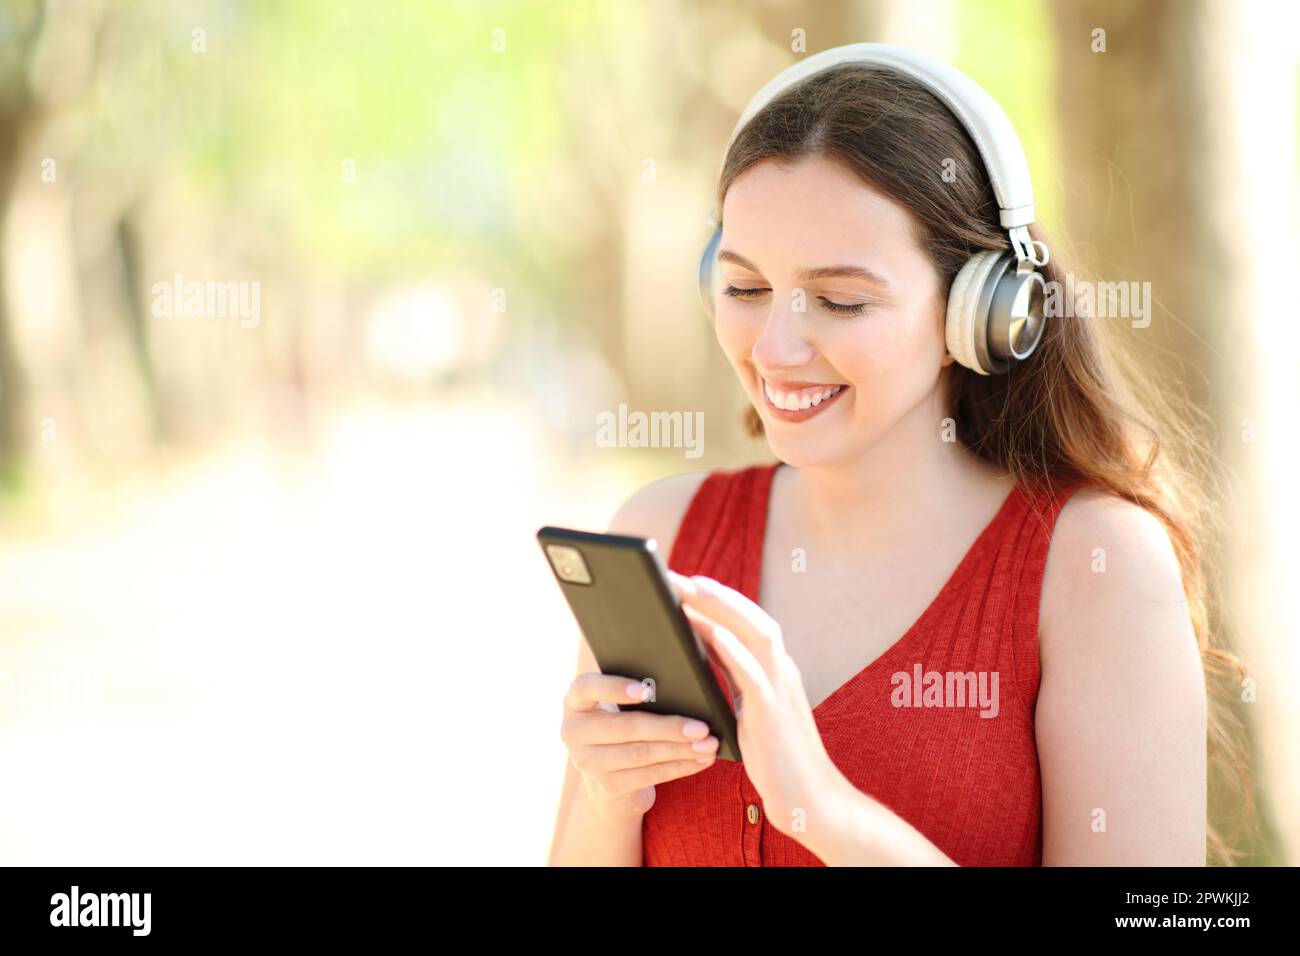 Happy woman wearing headphone listening to music using smart phone standing in a park Stock Photo